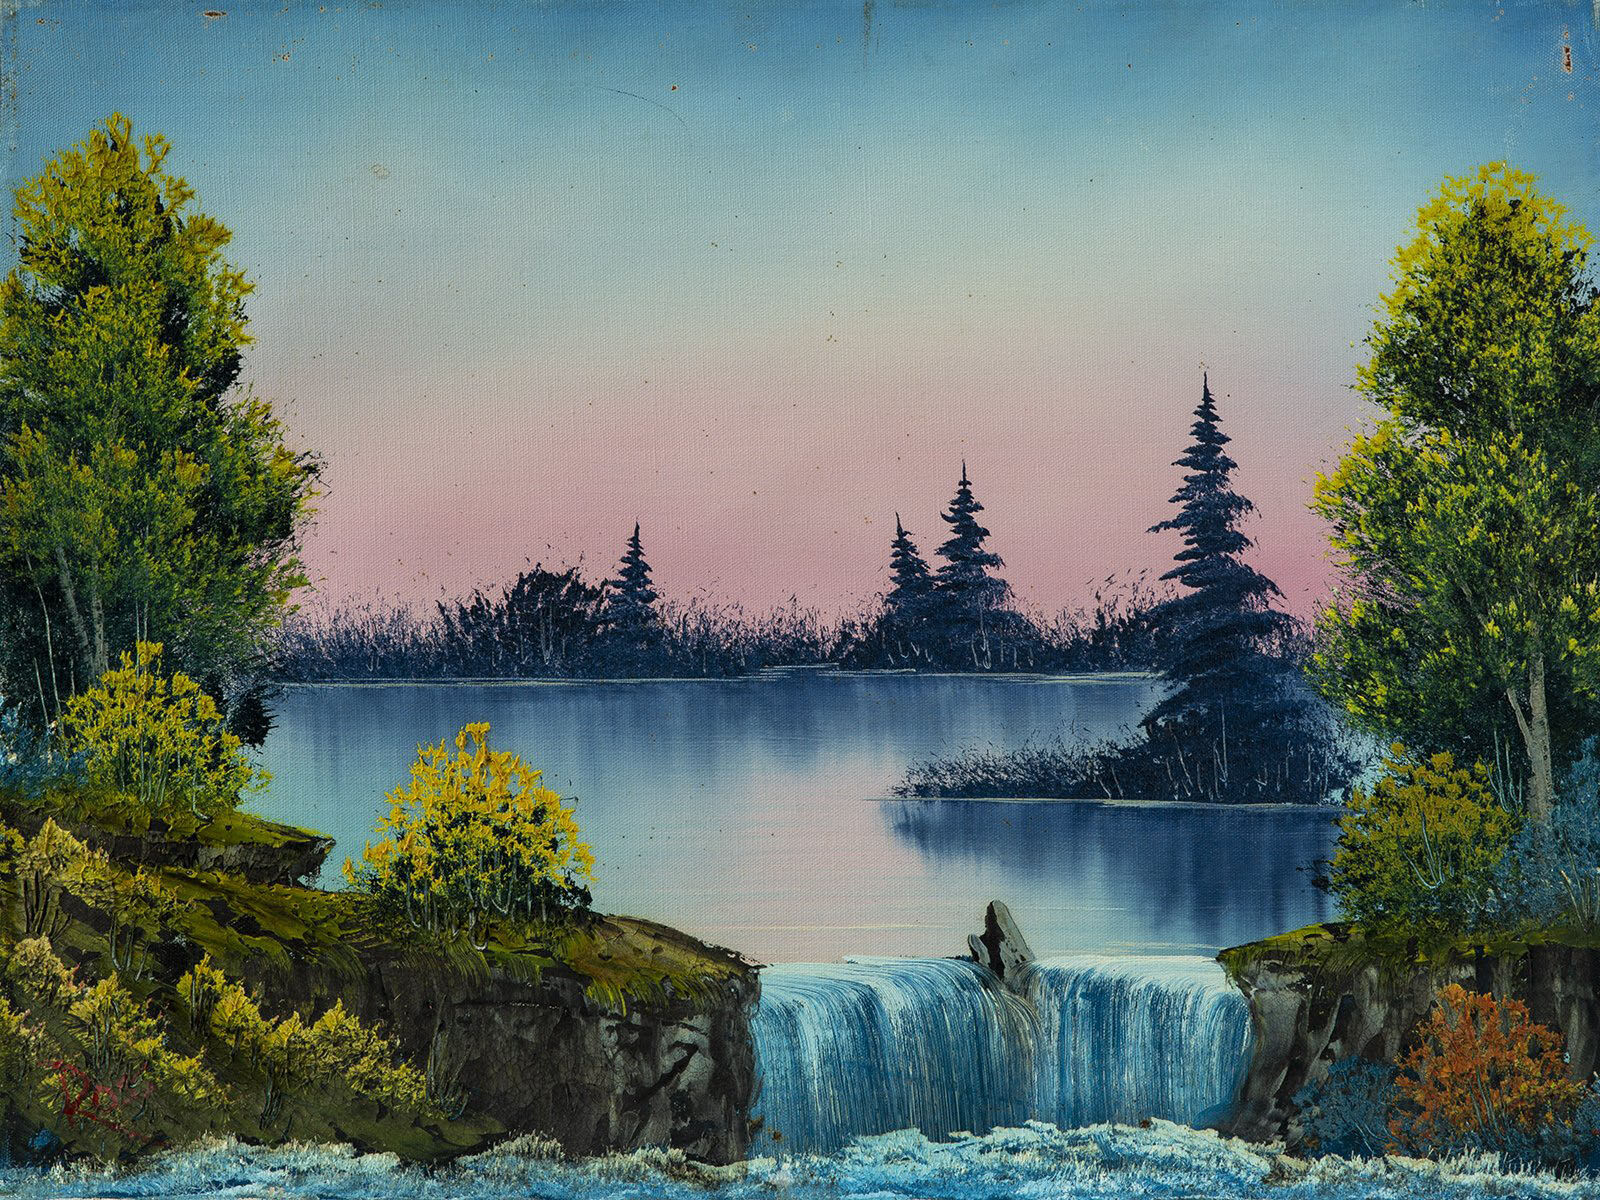 Bob Ross, Misty Waterfall, Original Oil Painting, 1980. Image Used with Permission © Modern Artifact.